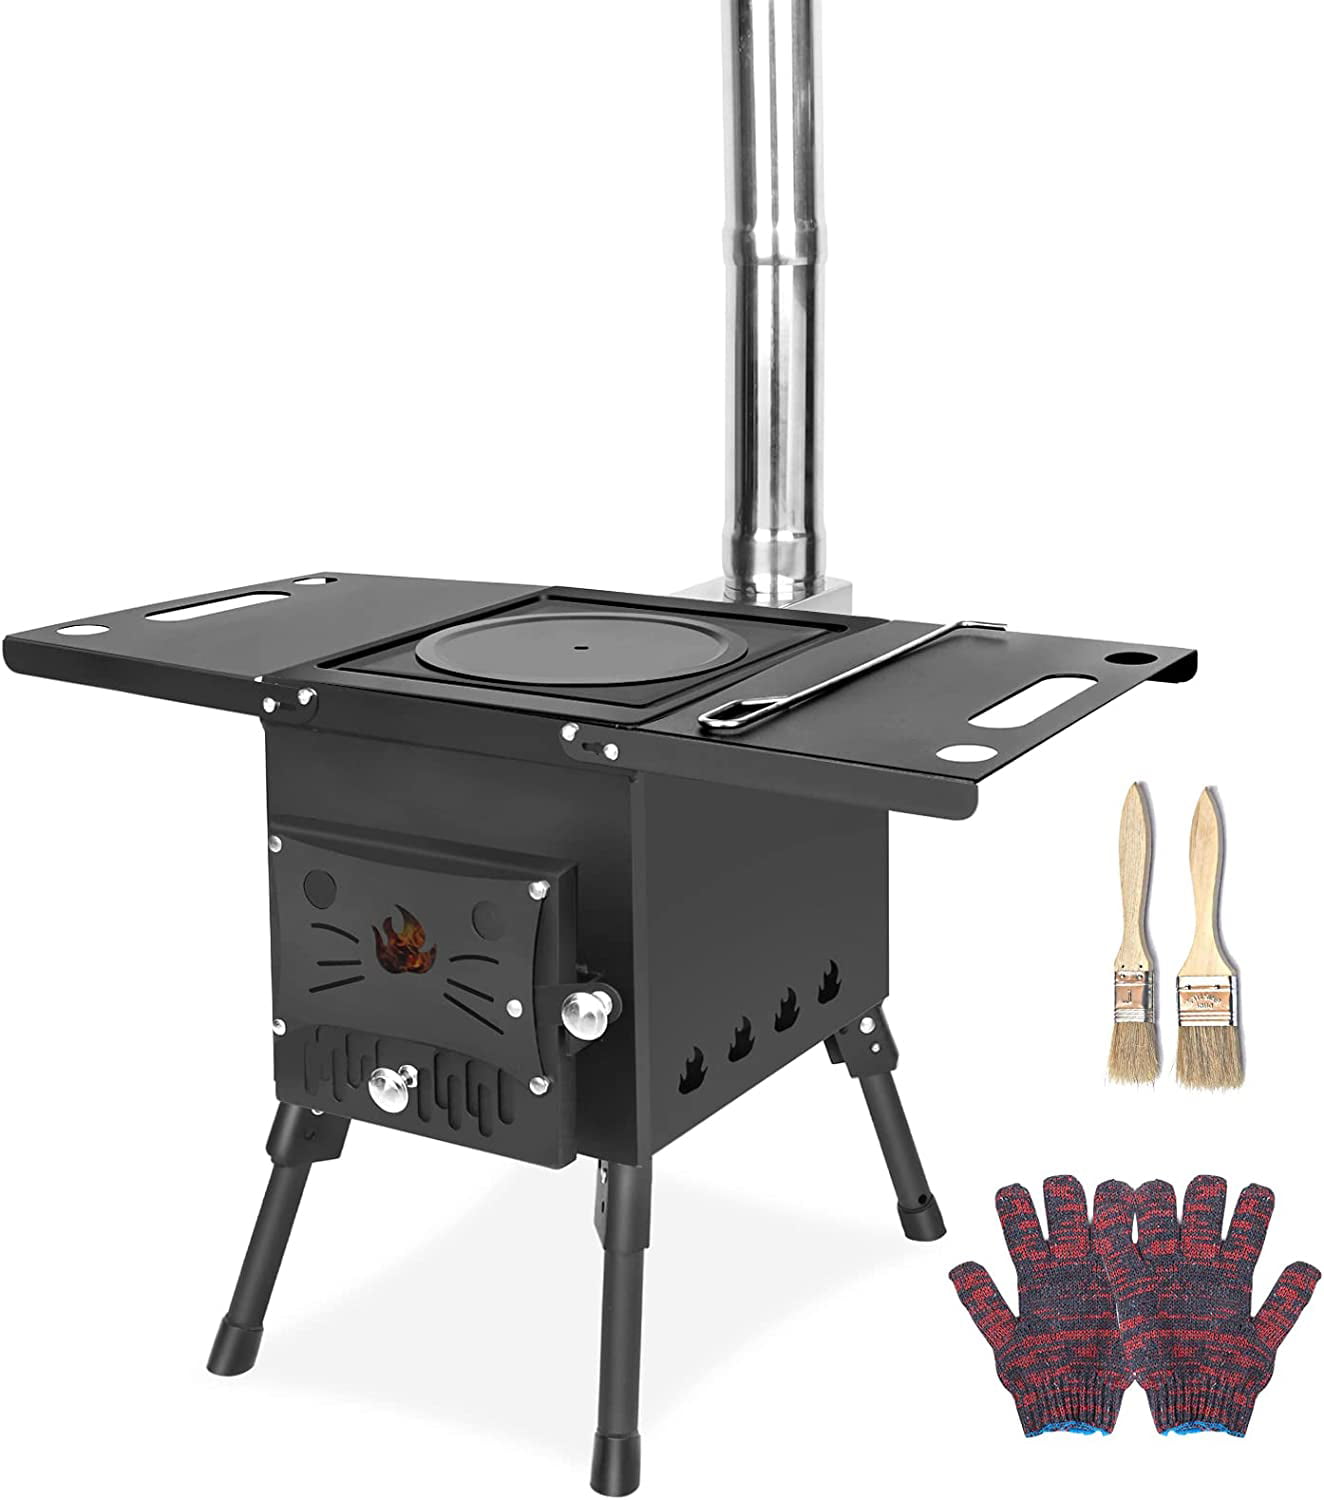 New Red Rock Outdoor Gear Folding Stove with Fuel Camping Gear RED06017 